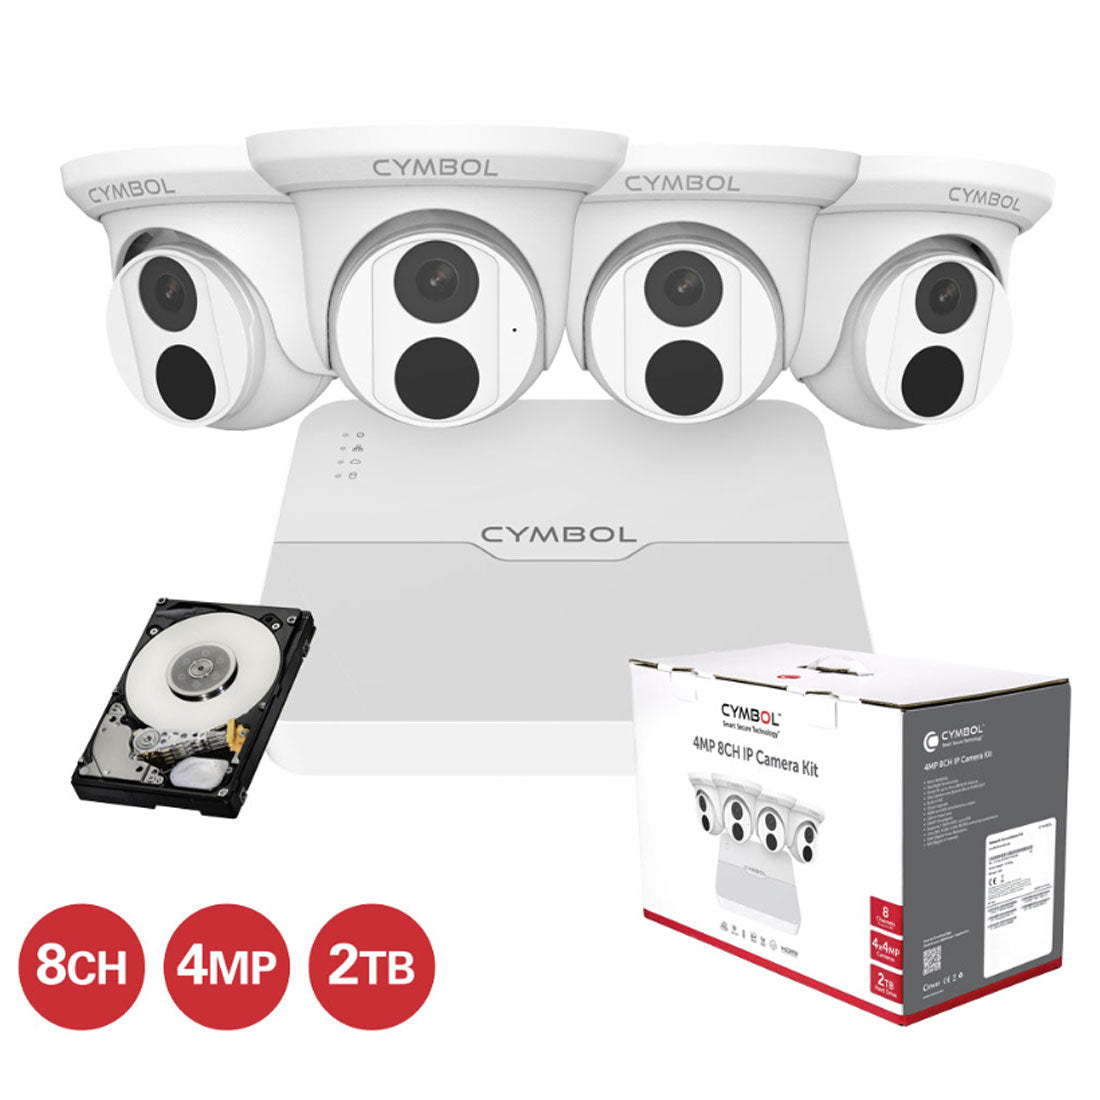 Cymbol 8 Channel IP Camera Kit with 4 x 4MP White Turret Cameras and 8 Channel 2TB NVR Lite